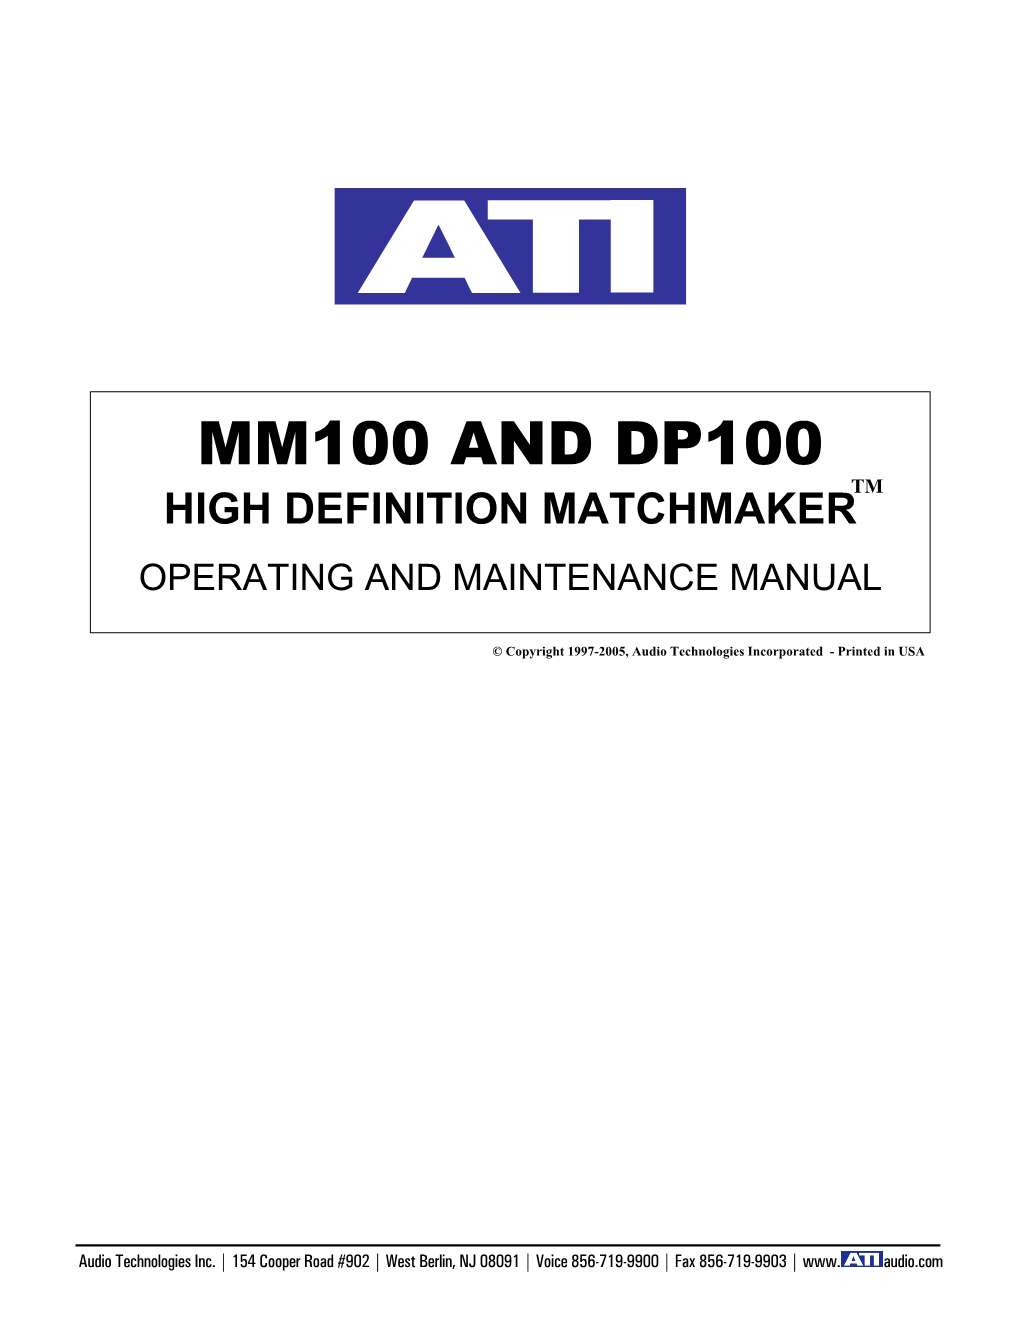 Mm100 and Dp100 Tm High Definition Matchmaker